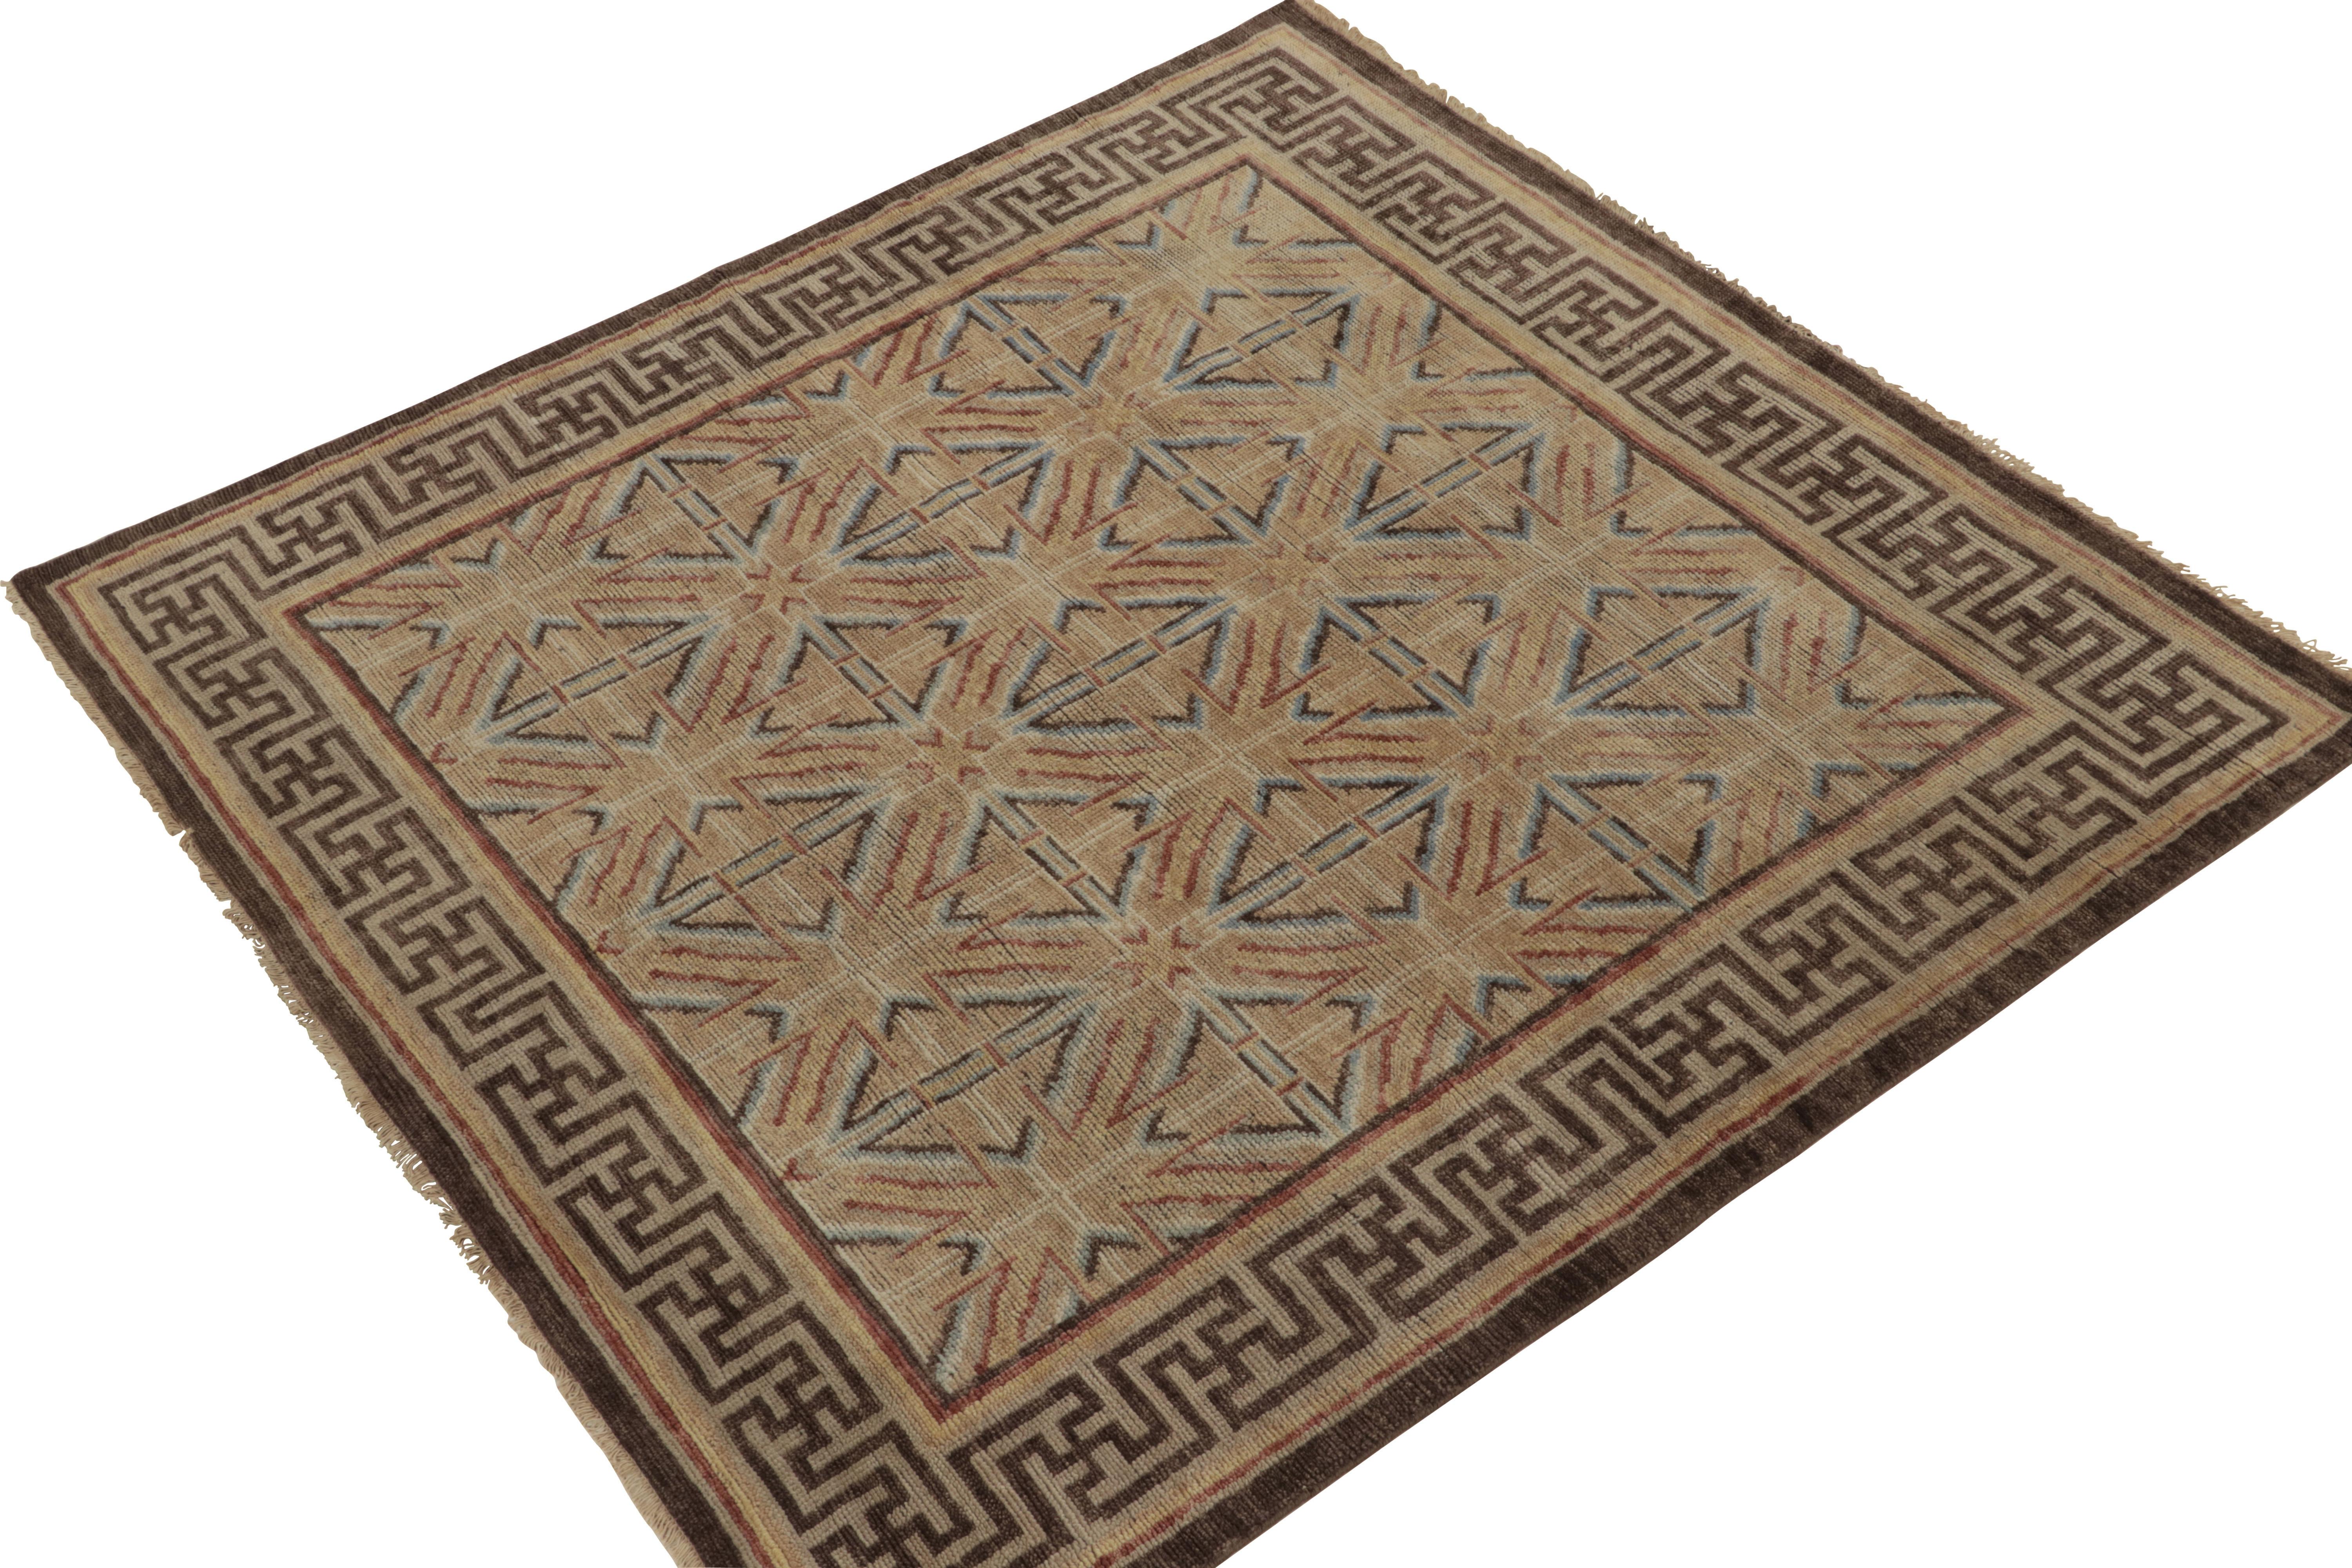 Handknotted in luxurious wool, this square rug of 6x6 size hails from our Burano Black-Weft Collection. 

On the Design: Particularly inspired by the 18th century Chinese dynastic pieces, the deco style diamond pattern rejoices in a muted